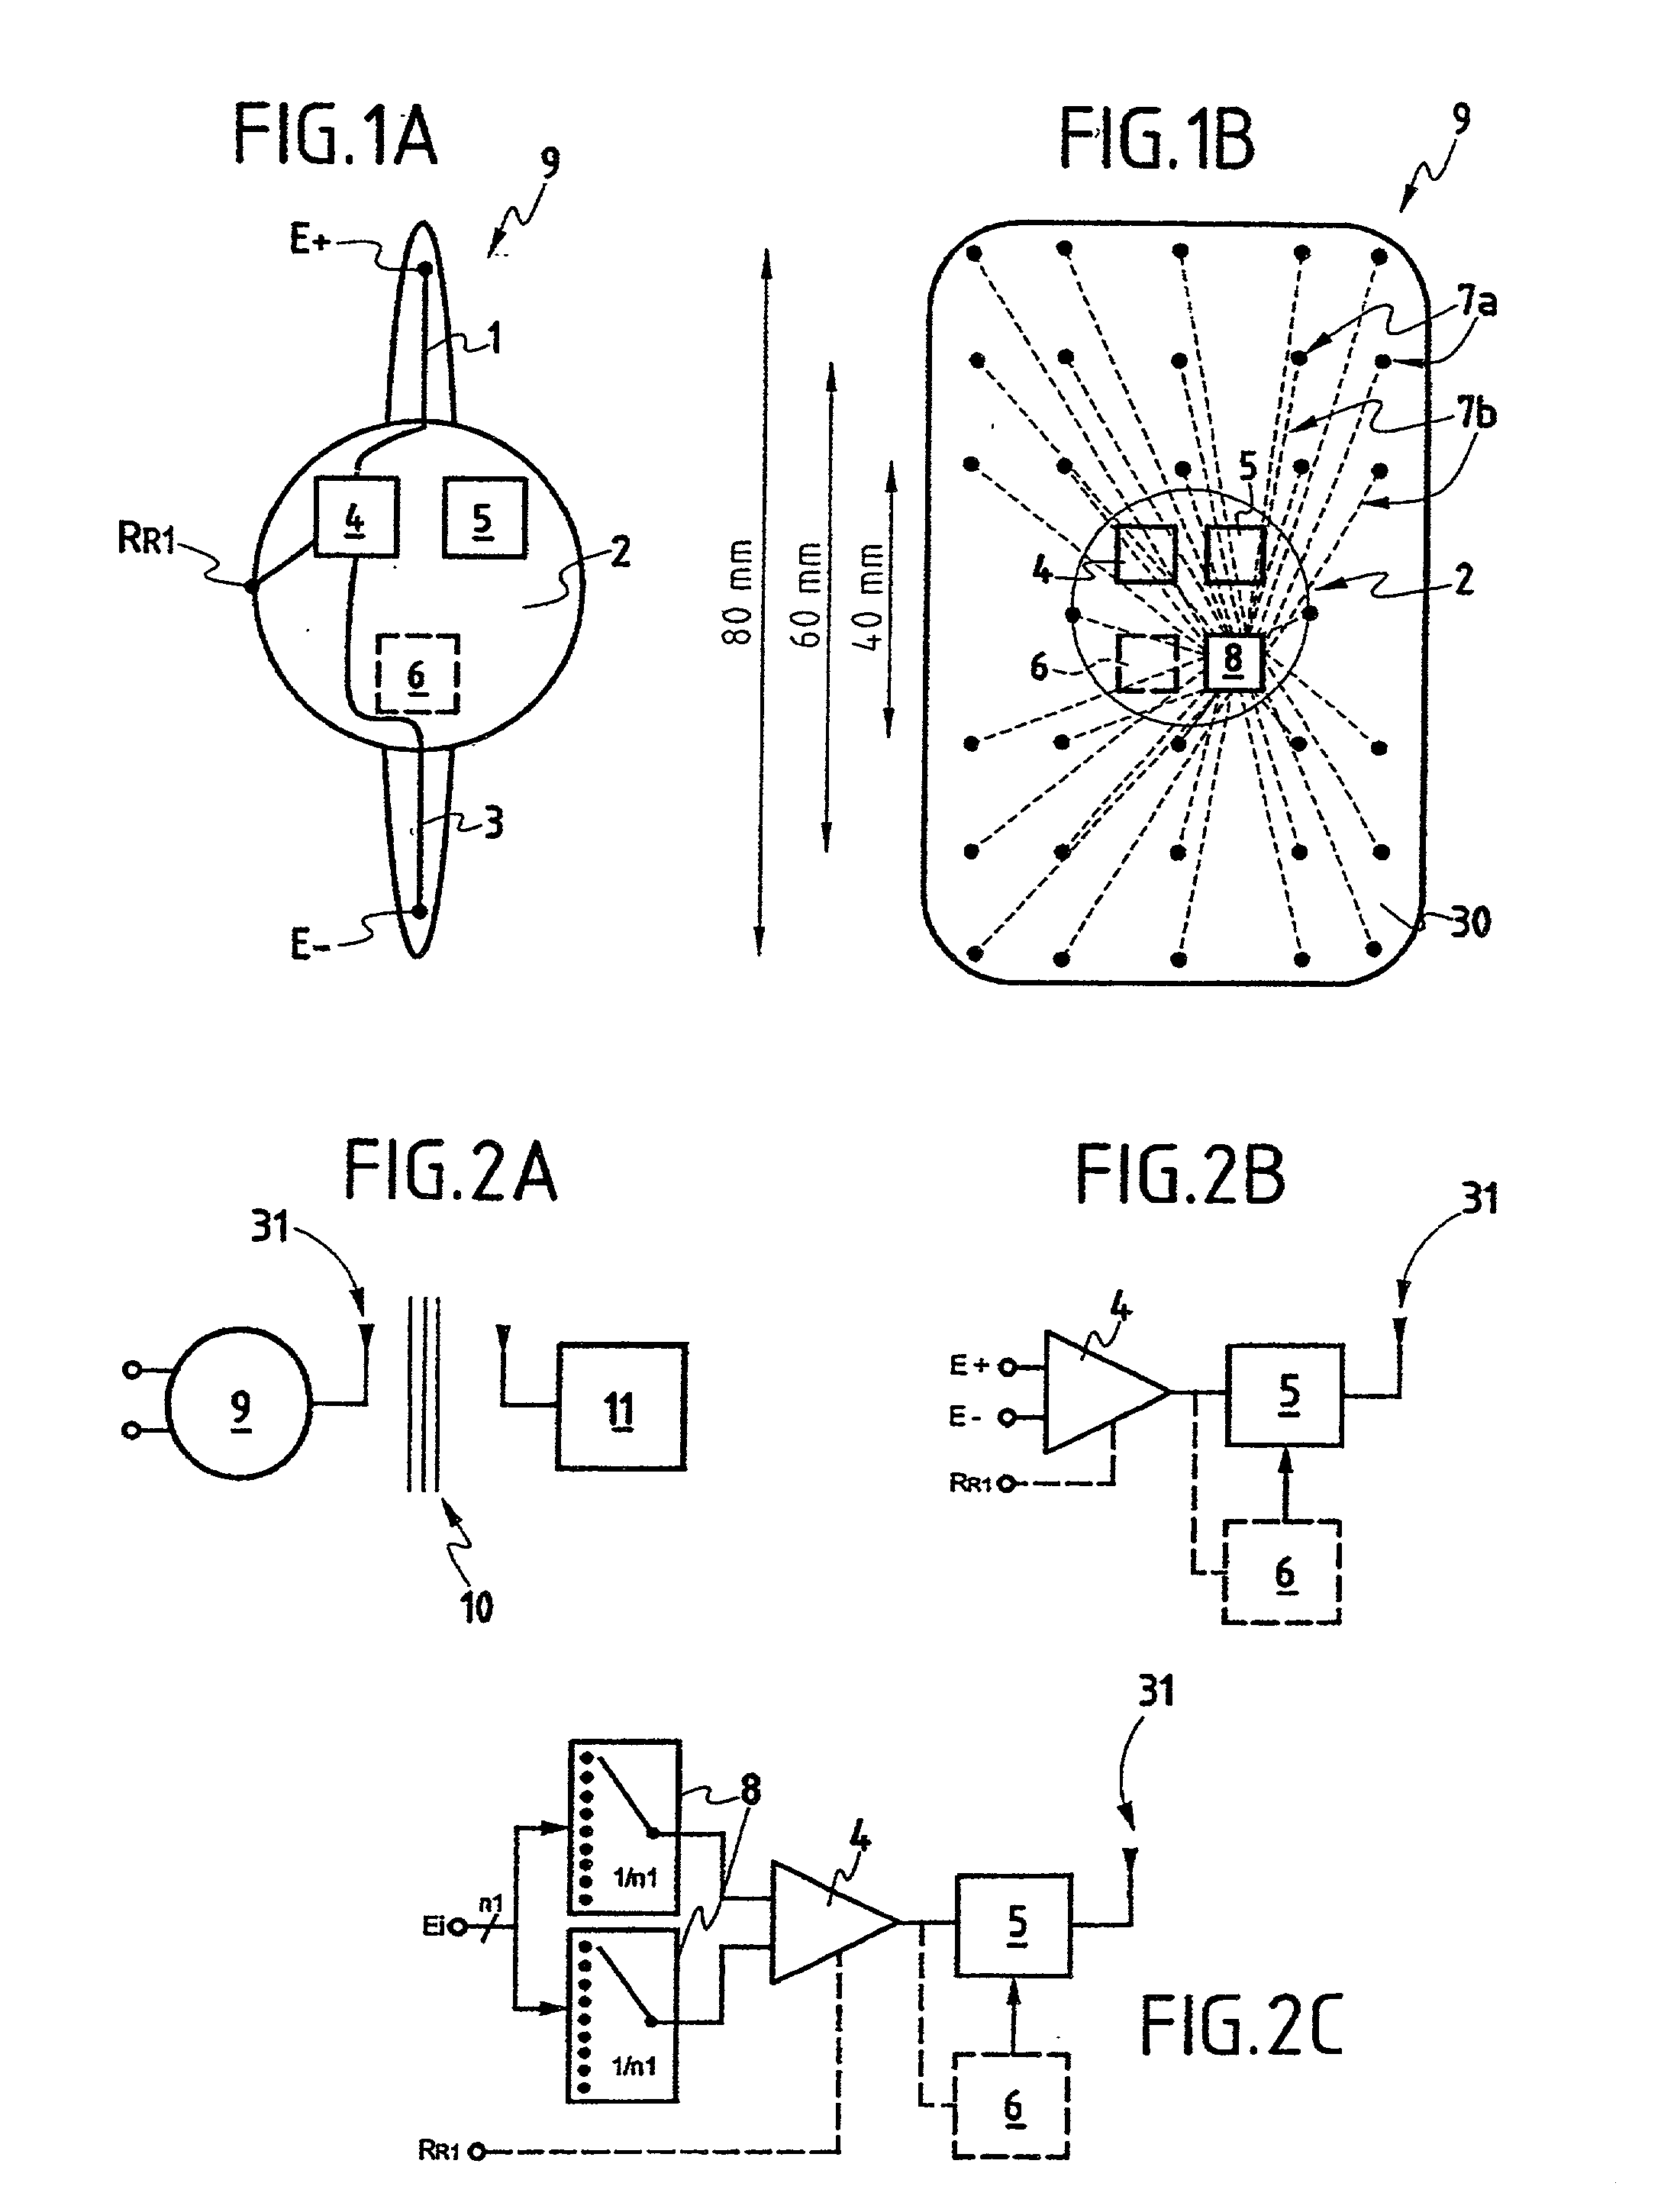 Method and apparatus for picking up auditory evoked potentials